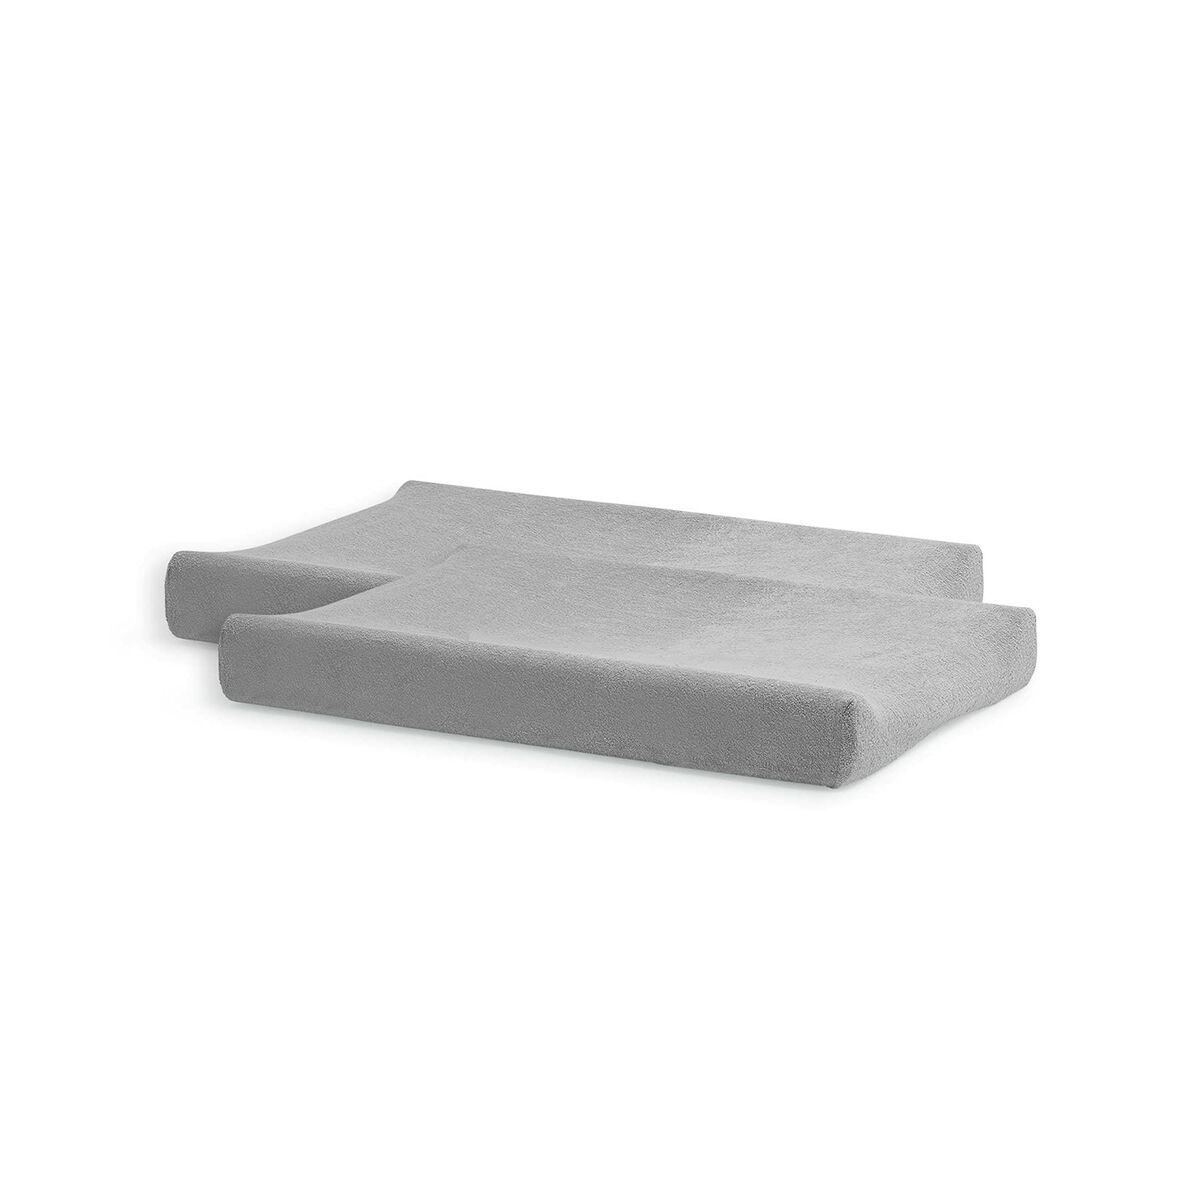 Fitted bottom sheet 2550-503-00078 Grey 50 x 70 cm Changer (Refurbished A)